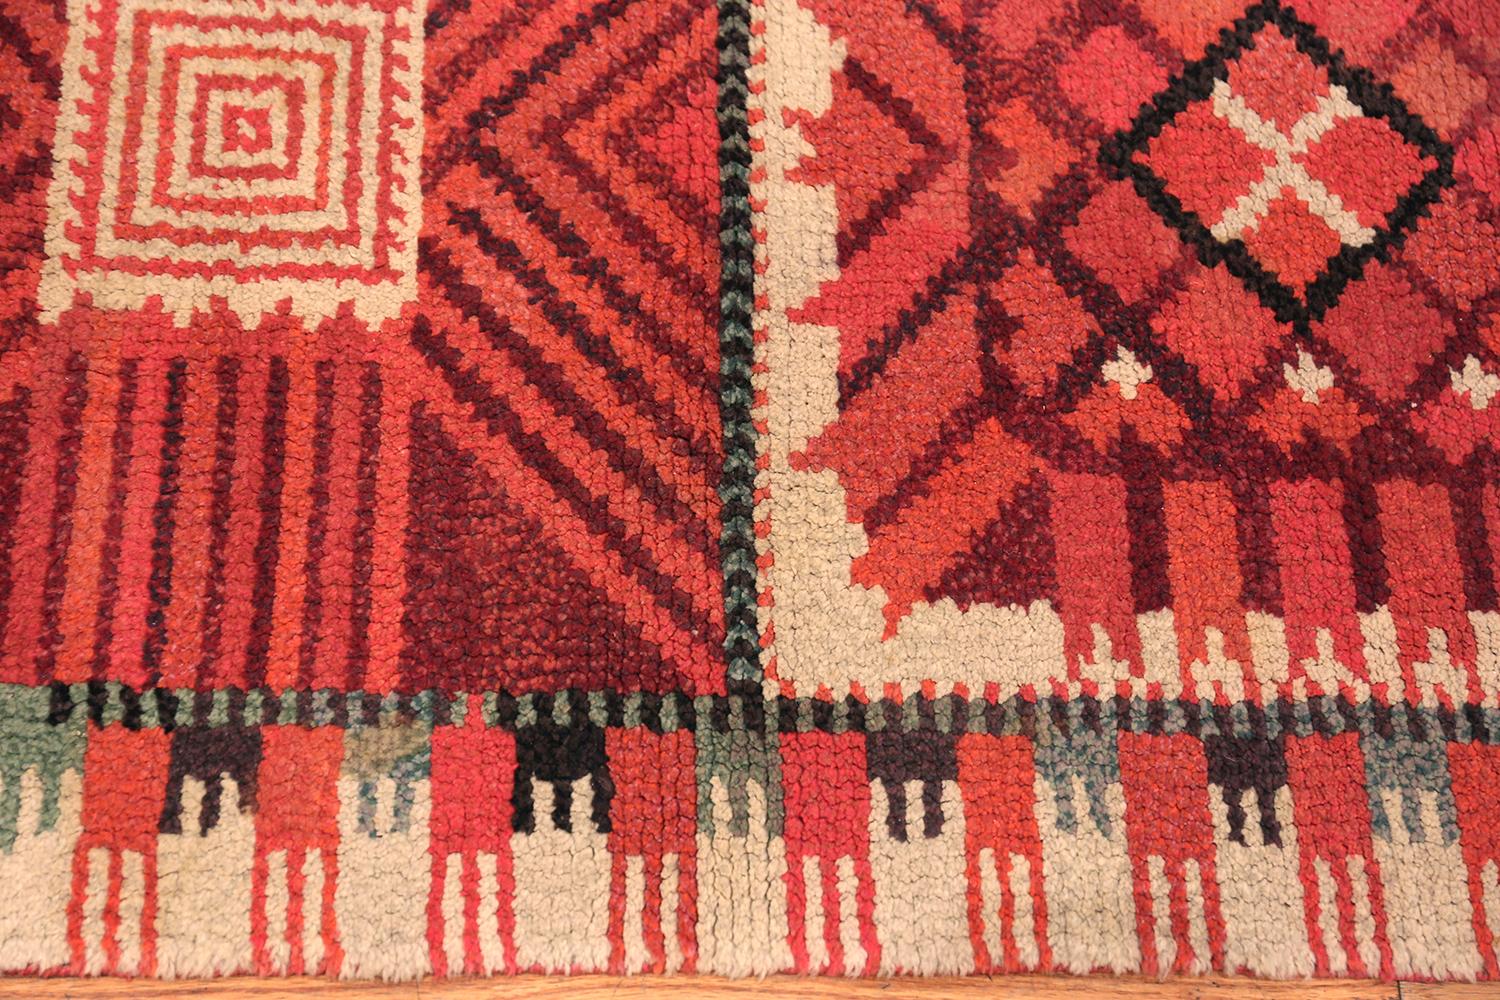 Beautiful small vintage Scandinavian by Barbro Nilsson for Marta Maas Rug, country of origin: Sweden, circa mid-20th century. Size: 2 ft 5 in x 3 ft 8 in (0.74 m x 1.12 m)

This gorgeous geometric Scandinavian rug was created for the Marta Maas Rug